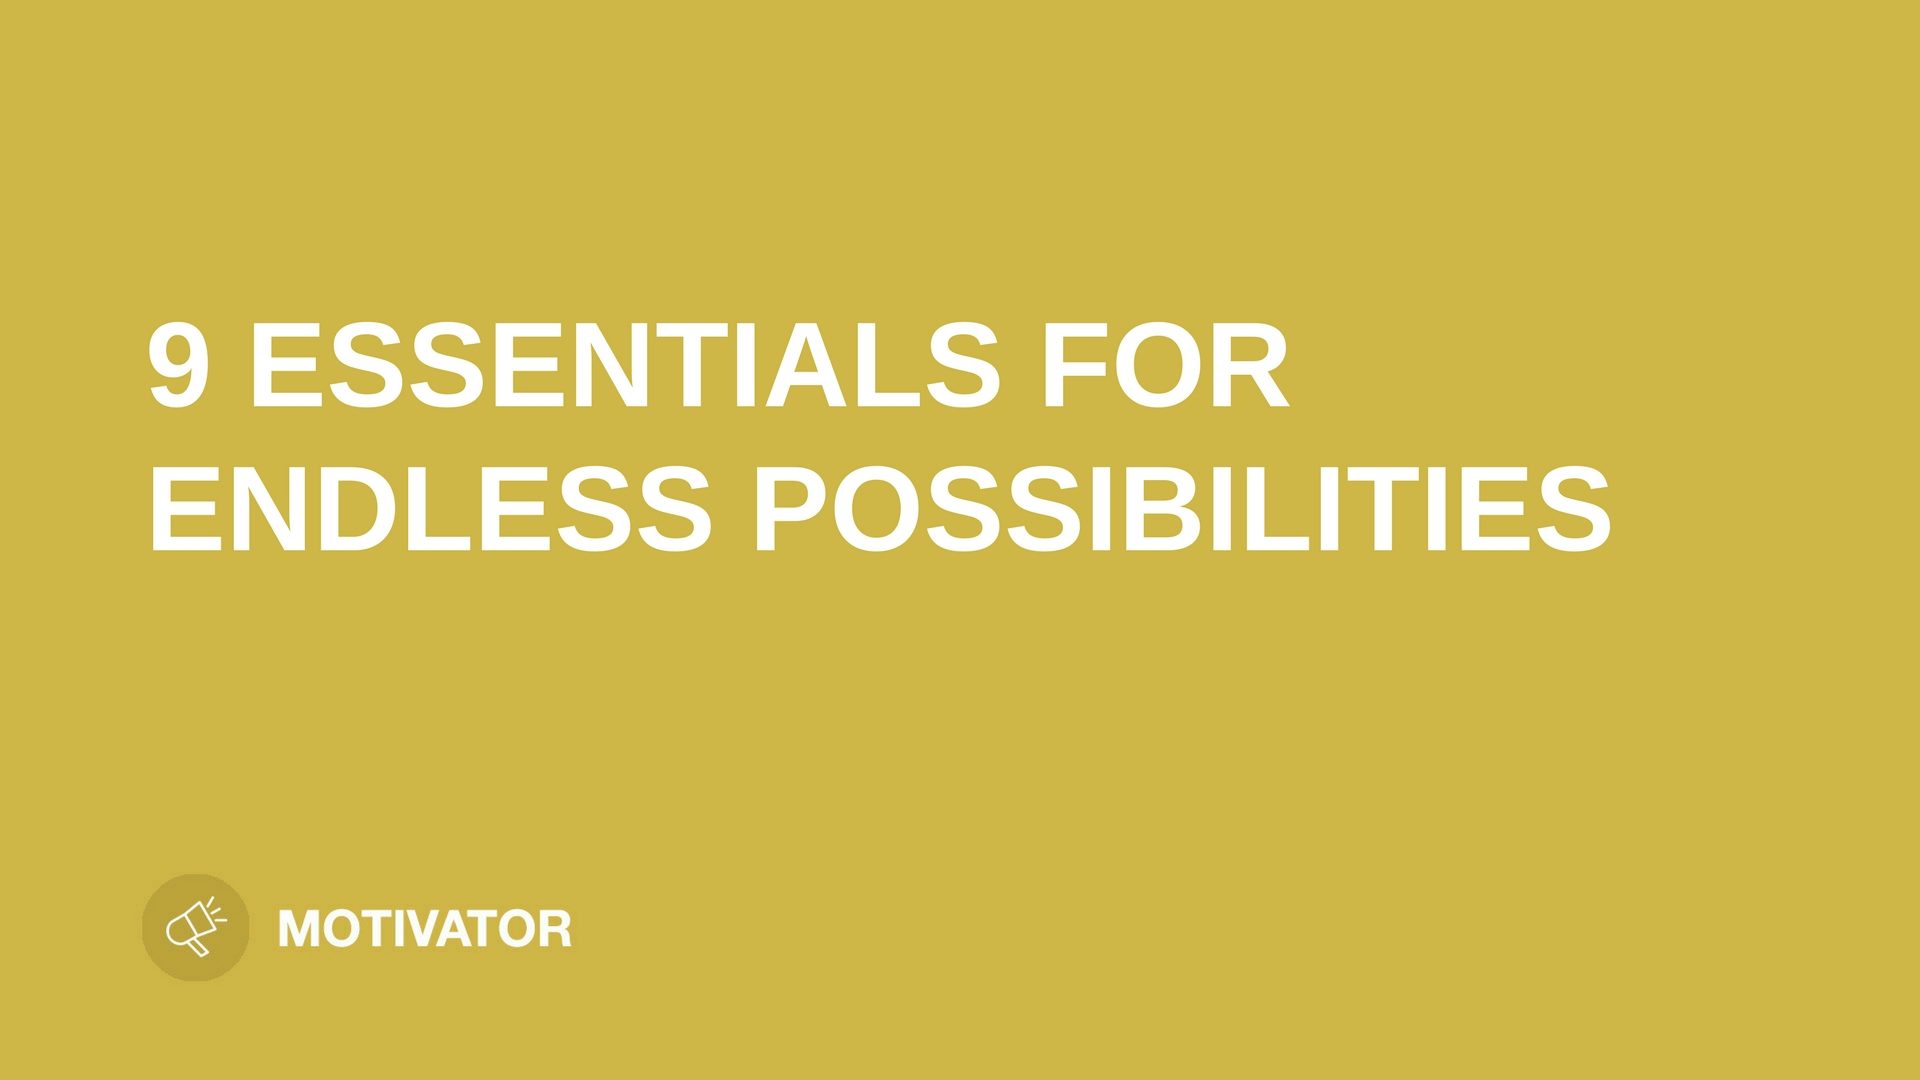 text "9 ESSENTIALS FOR ENDLESS POSSIBILITIES" on yellow background leaders.church